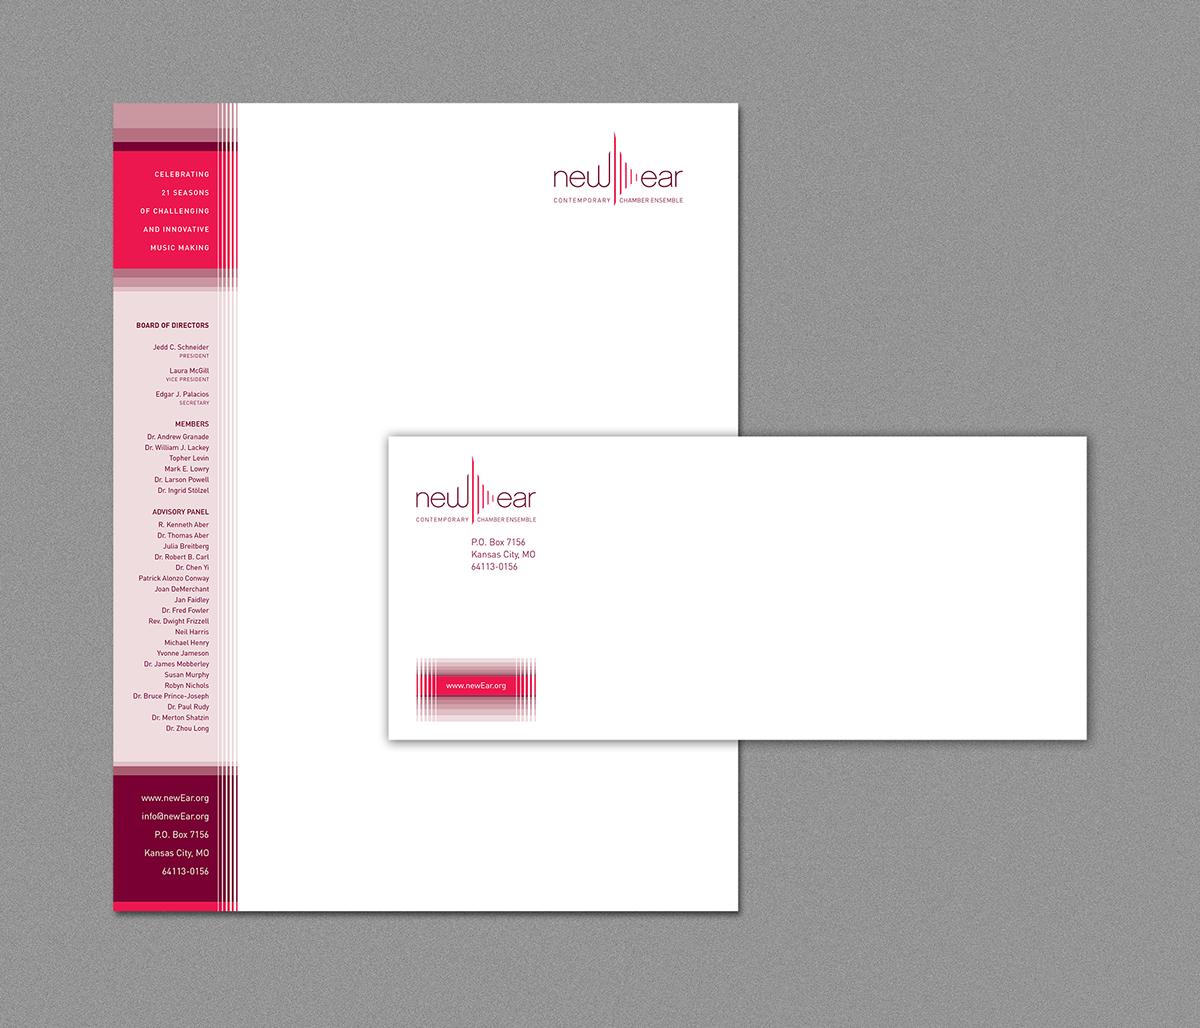 Adobe Portfolio Corporate Identity collateral materials Stationery mailers brochures catalogs postcards branding  logo